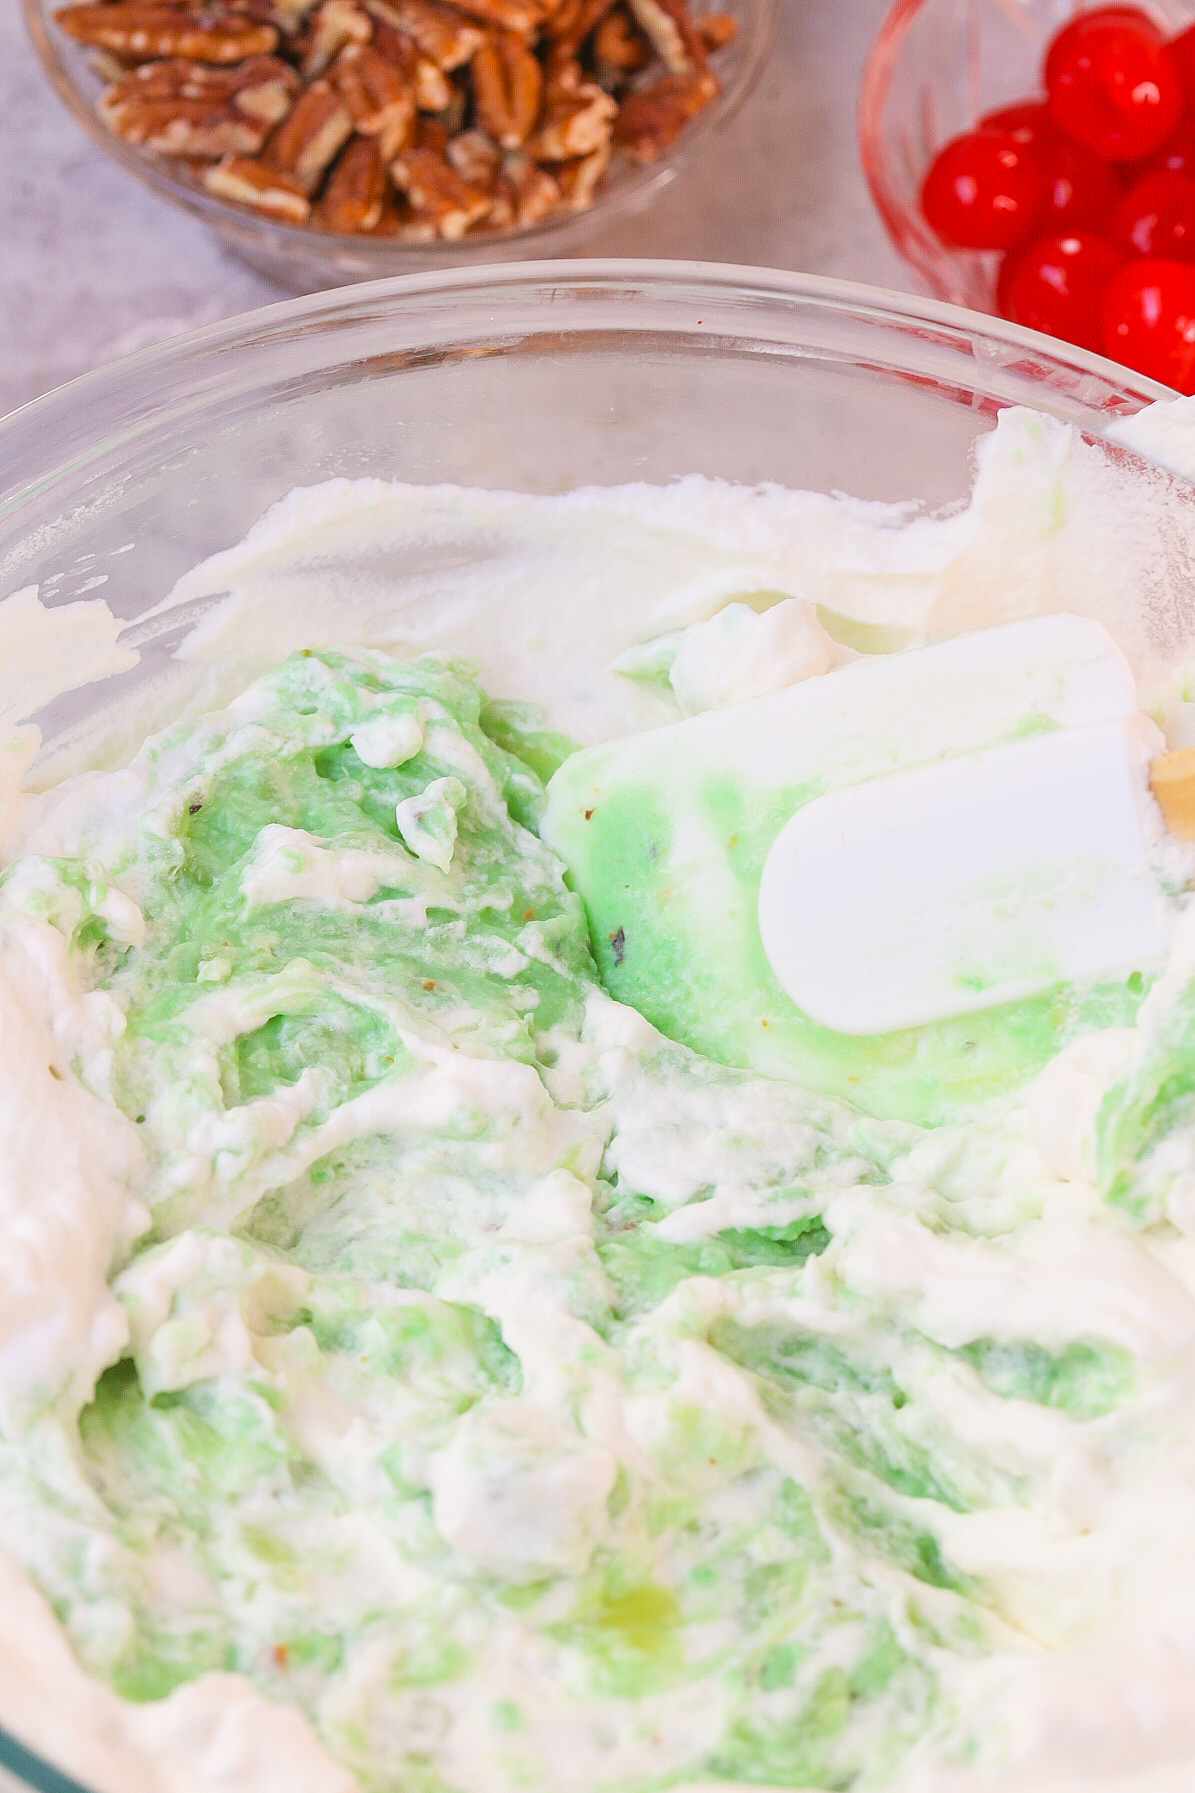 Ambrosia Watergate Salad with coconut pistachio pudding mixed with homemade whipped cream